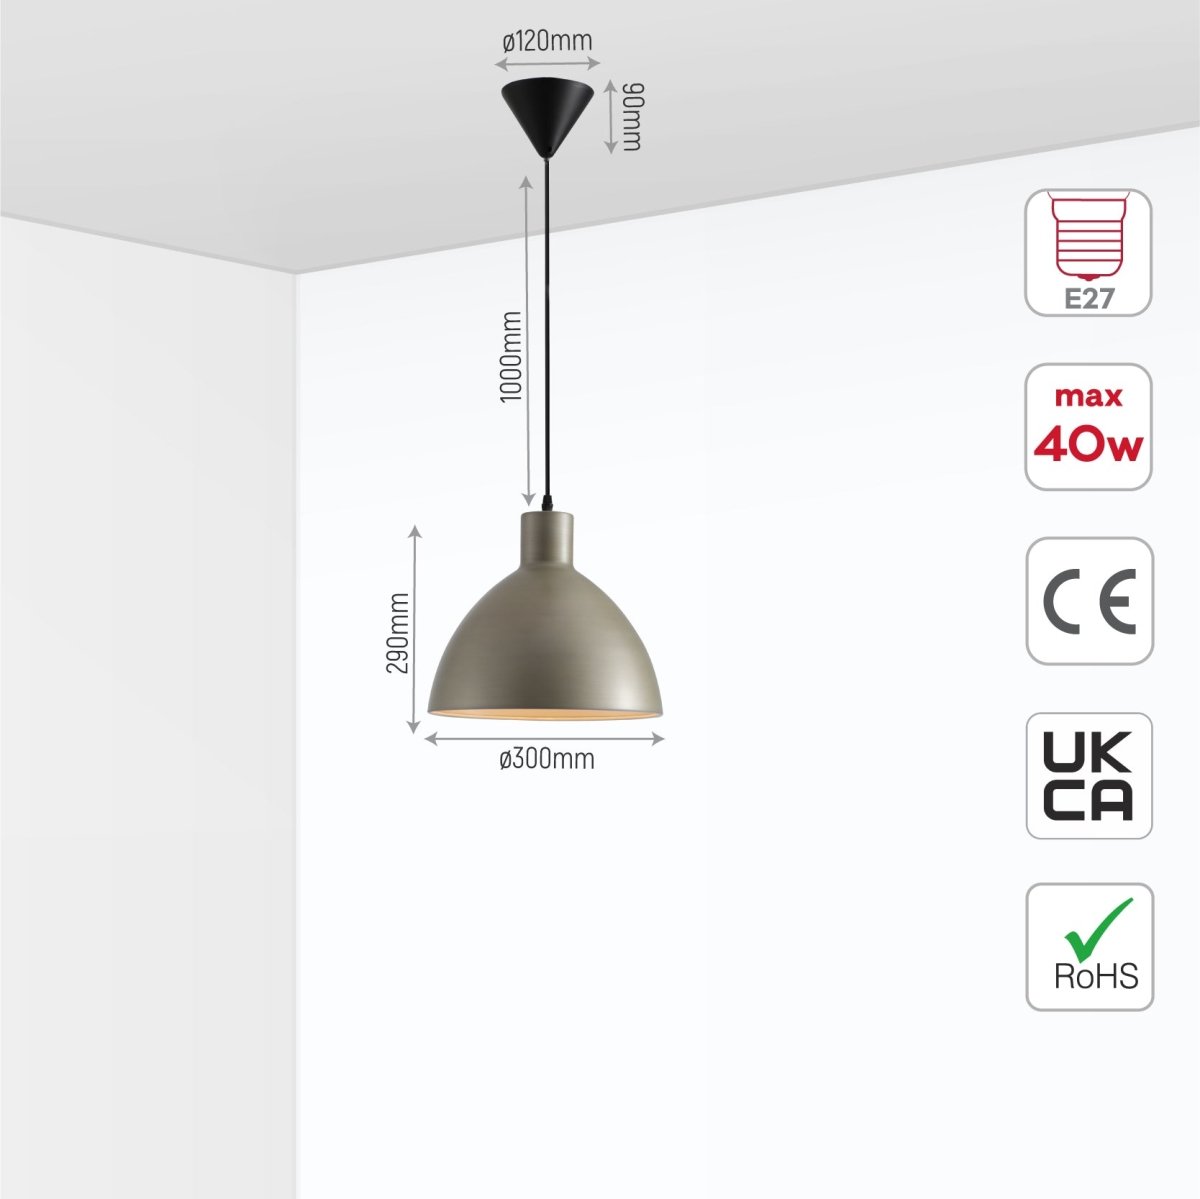 Size and specs of Antique Grey Brass Dome Metal Pendant Ceiling Light with E27 Fitting D220 | TEKLED 150-18193